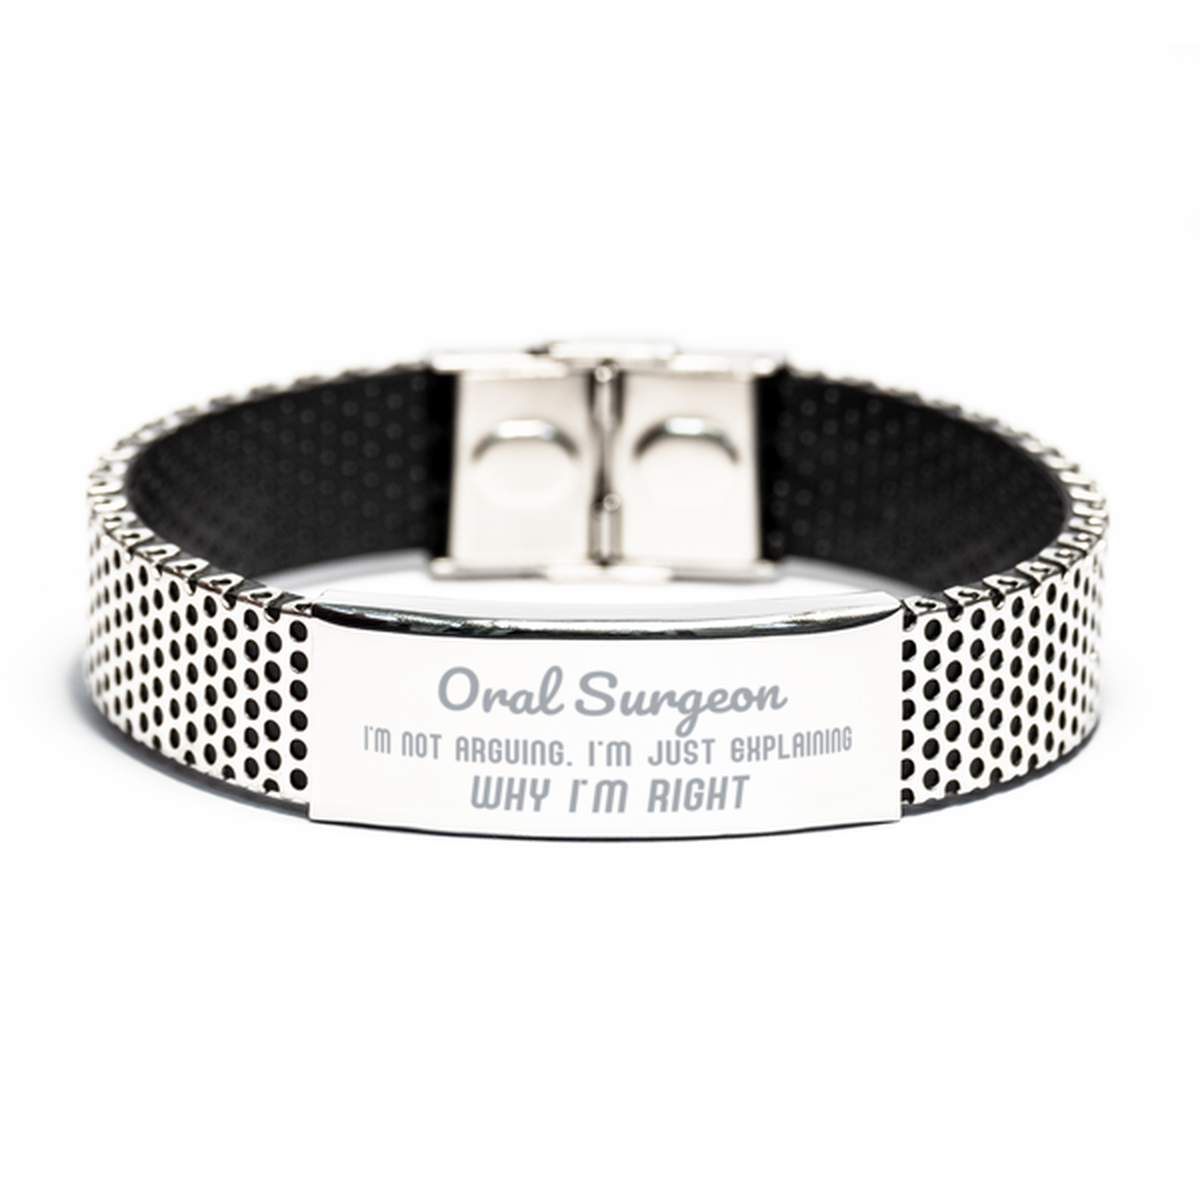 Oral Surgeon I'm not Arguing. I'm Just Explaining Why I'm RIGHT Stainless Steel Bracelet, Funny Saying Quote Oral Surgeon Gifts For Oral Surgeon Graduation Birthday Christmas Gifts for Men Women Coworker